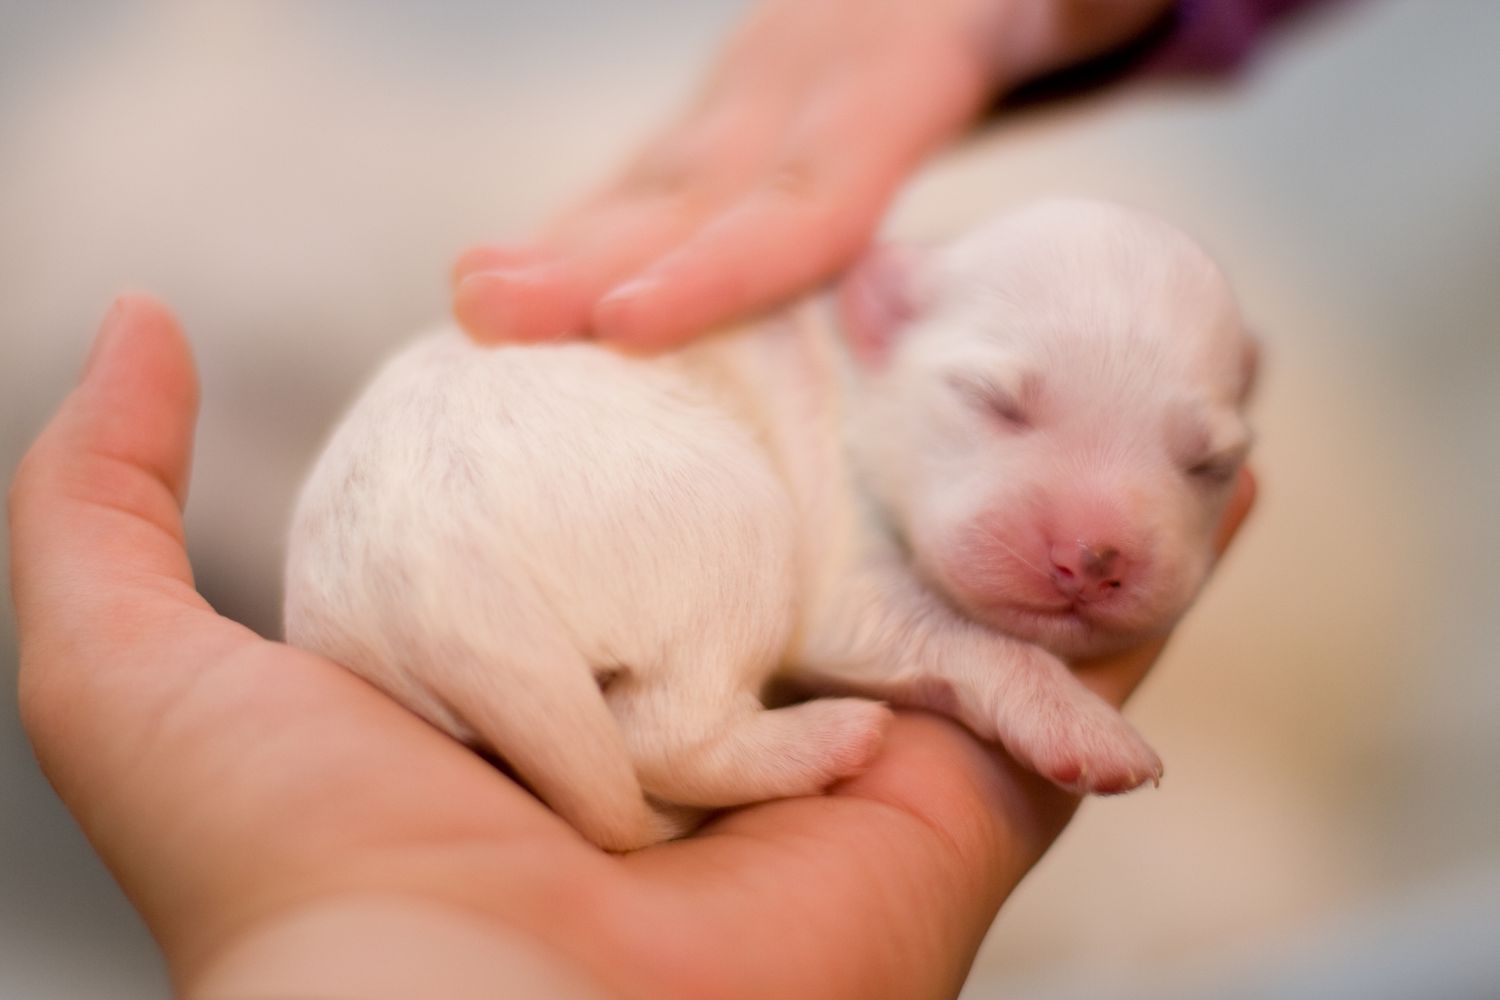 What should you not do with newborn puppies?